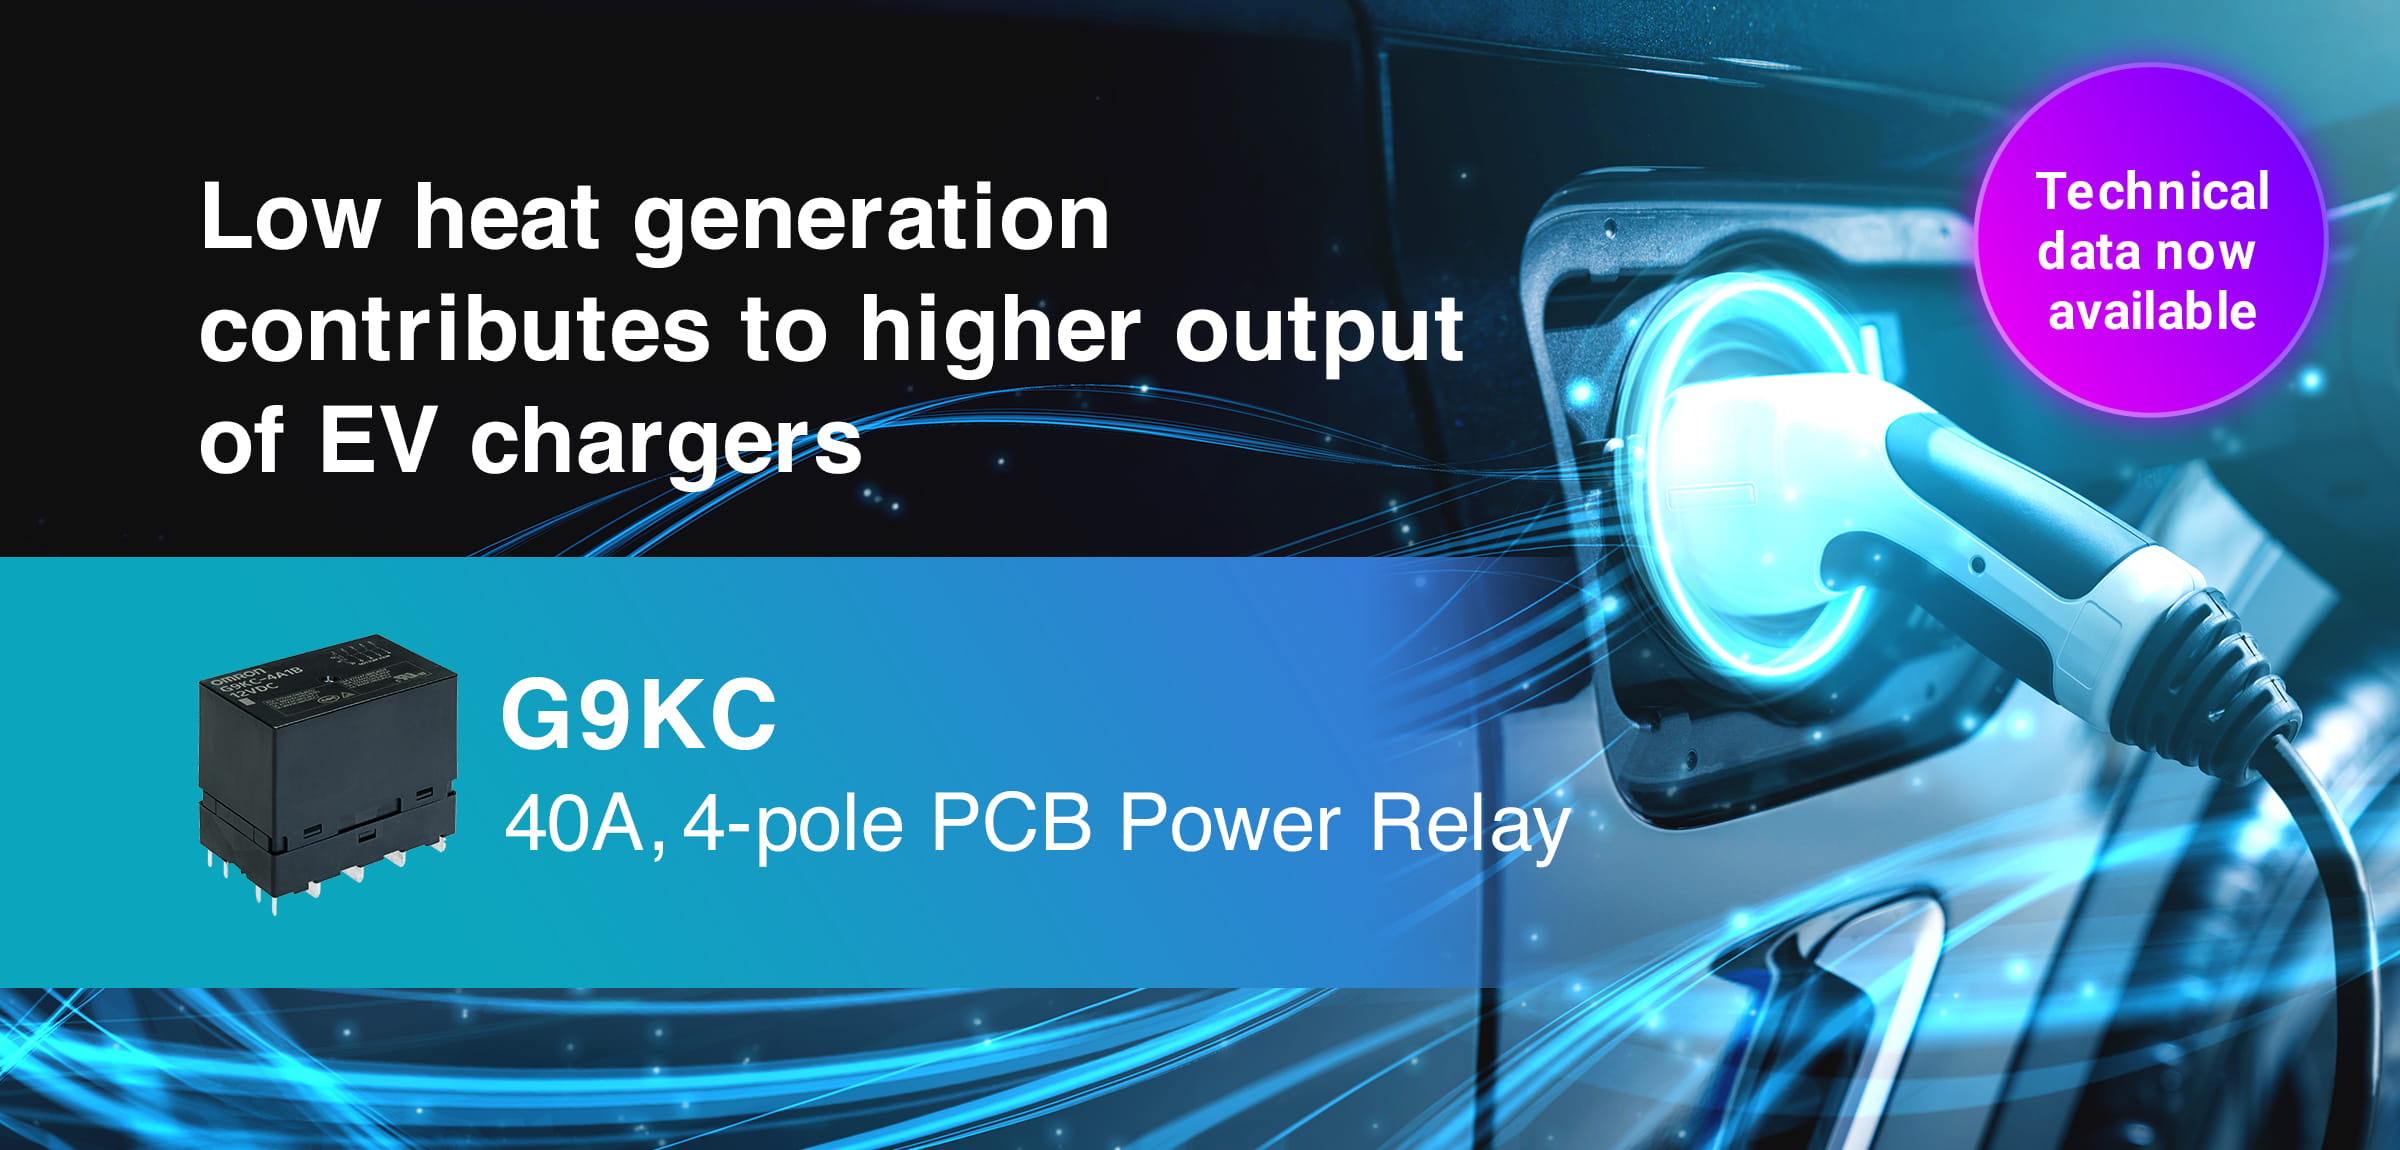 Low heat generation contributes to higher output of EV chargers. G9KC 40A,4-pole PCB Power Relay. Technical data now available